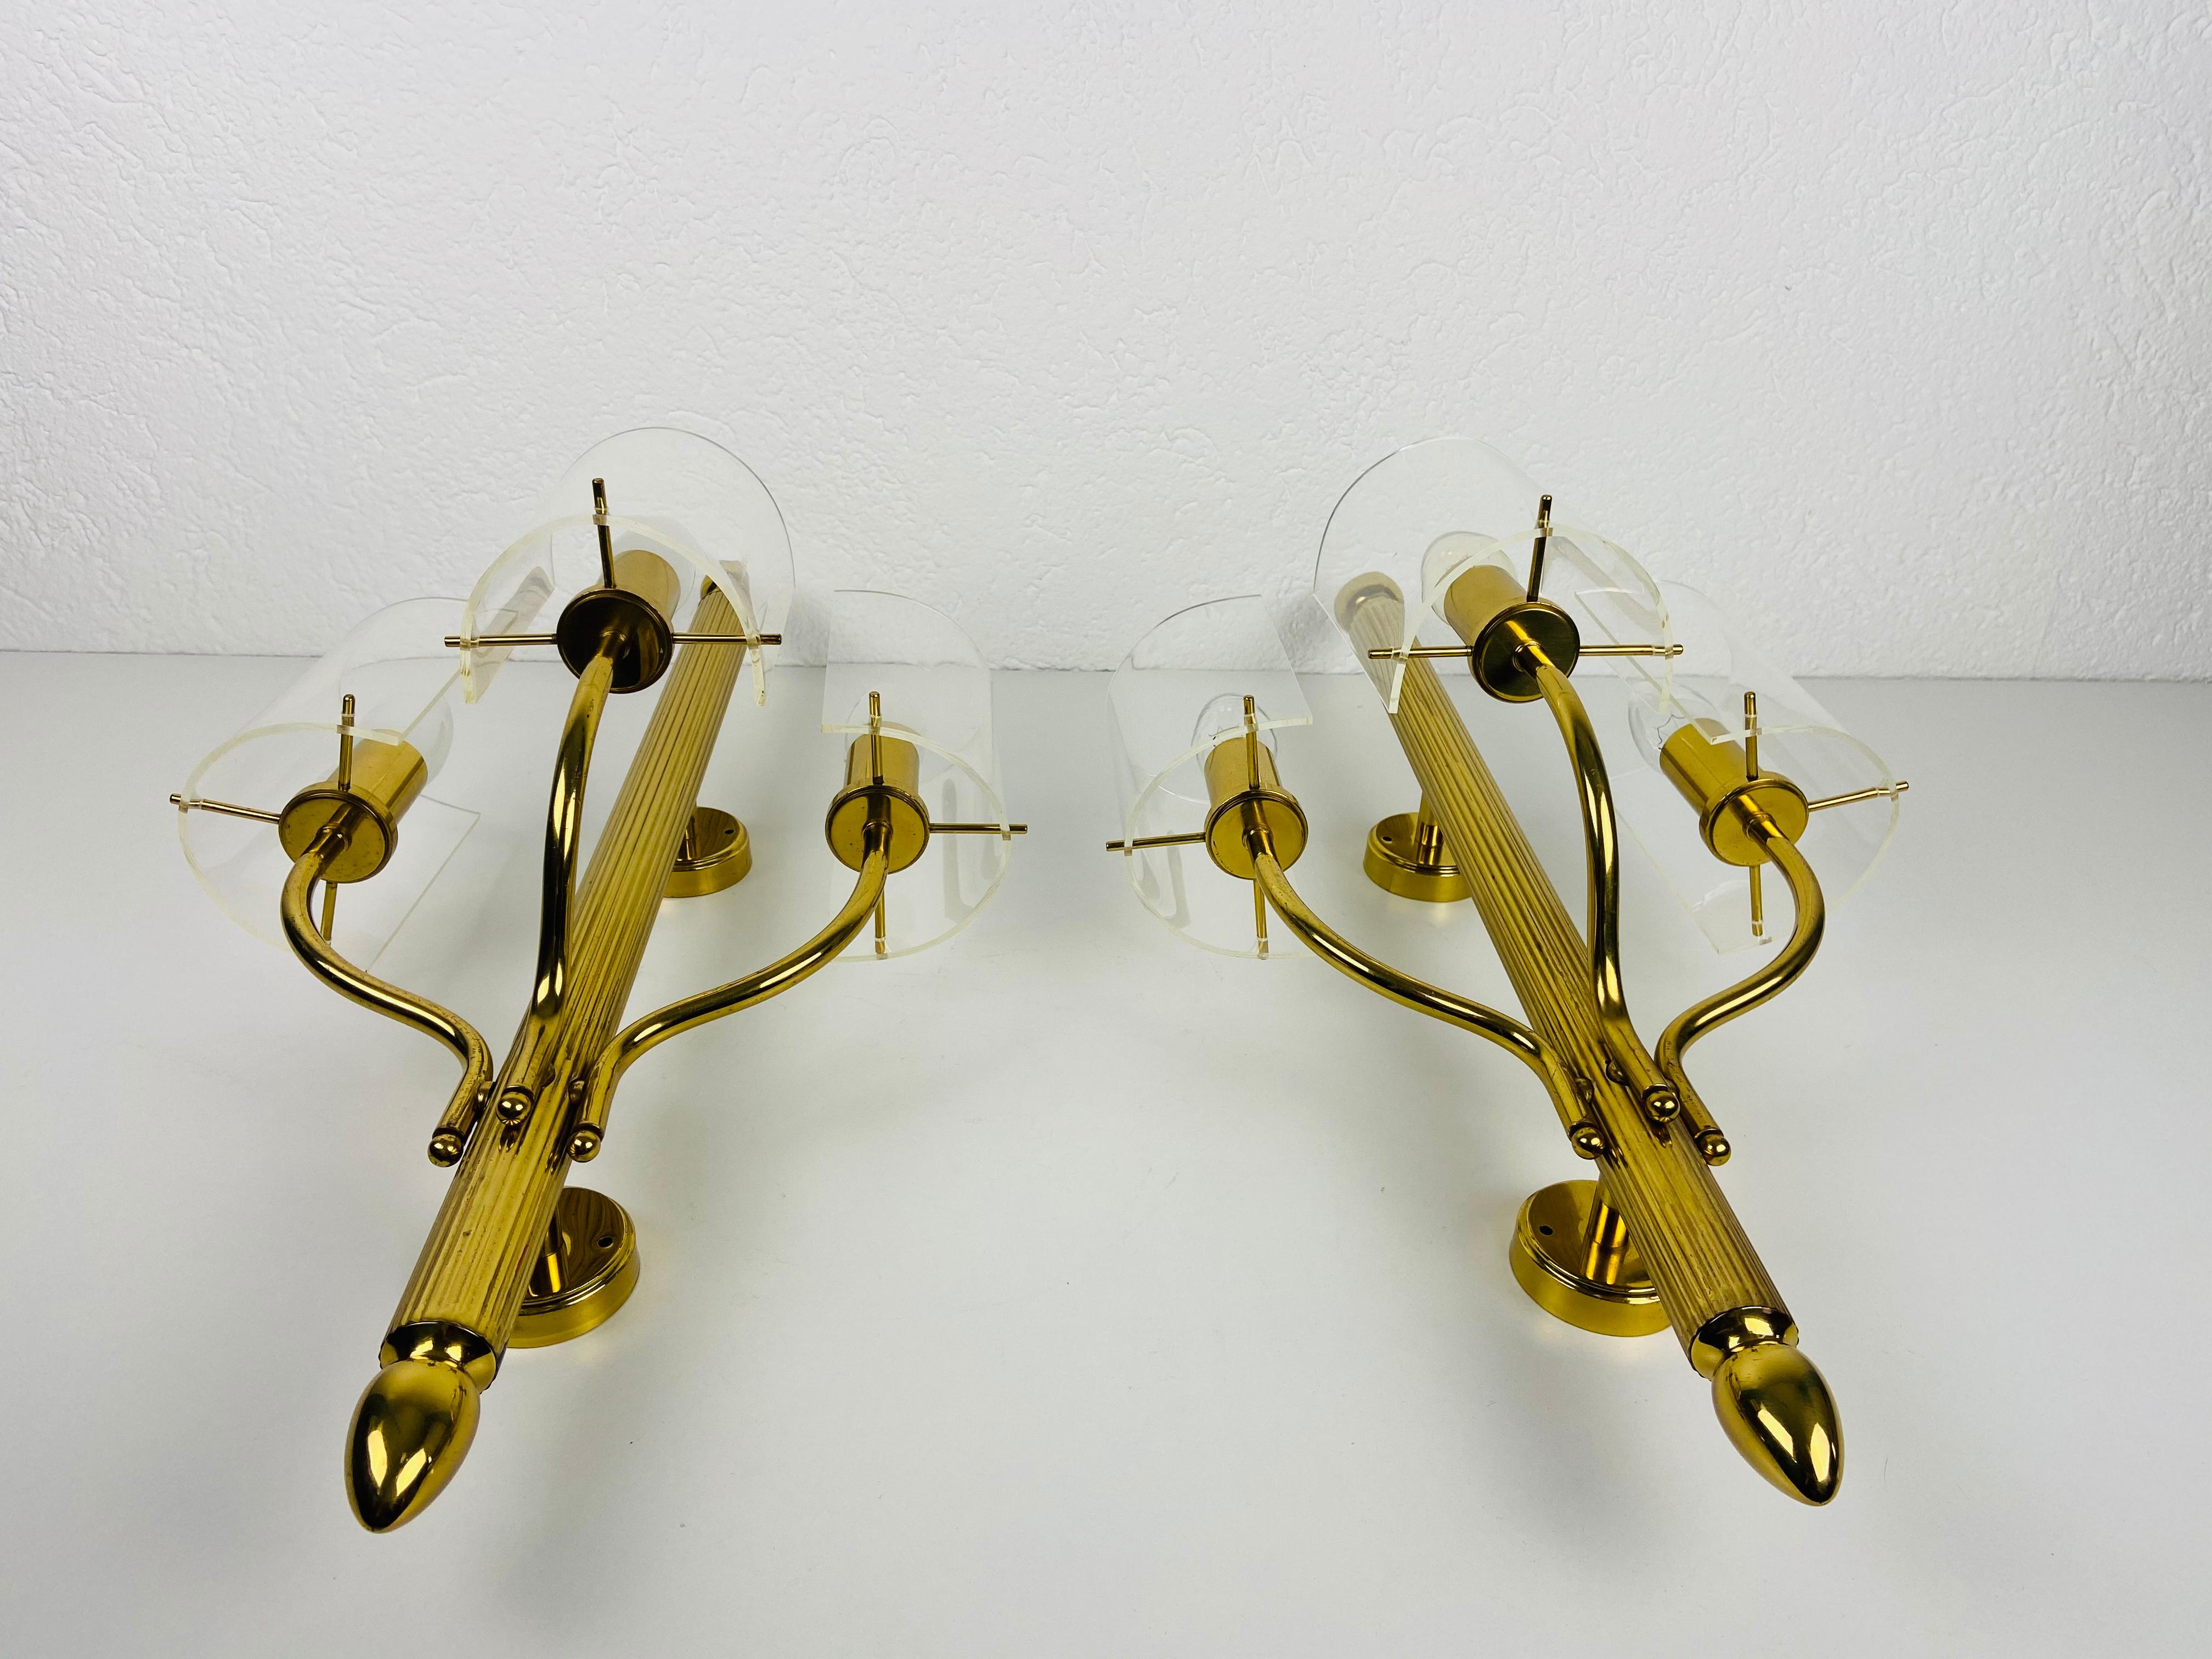 Huge Pair of Mid-Century Modern Brass and Perspex Cinema Wall Lamps, 1950s For Sale 1